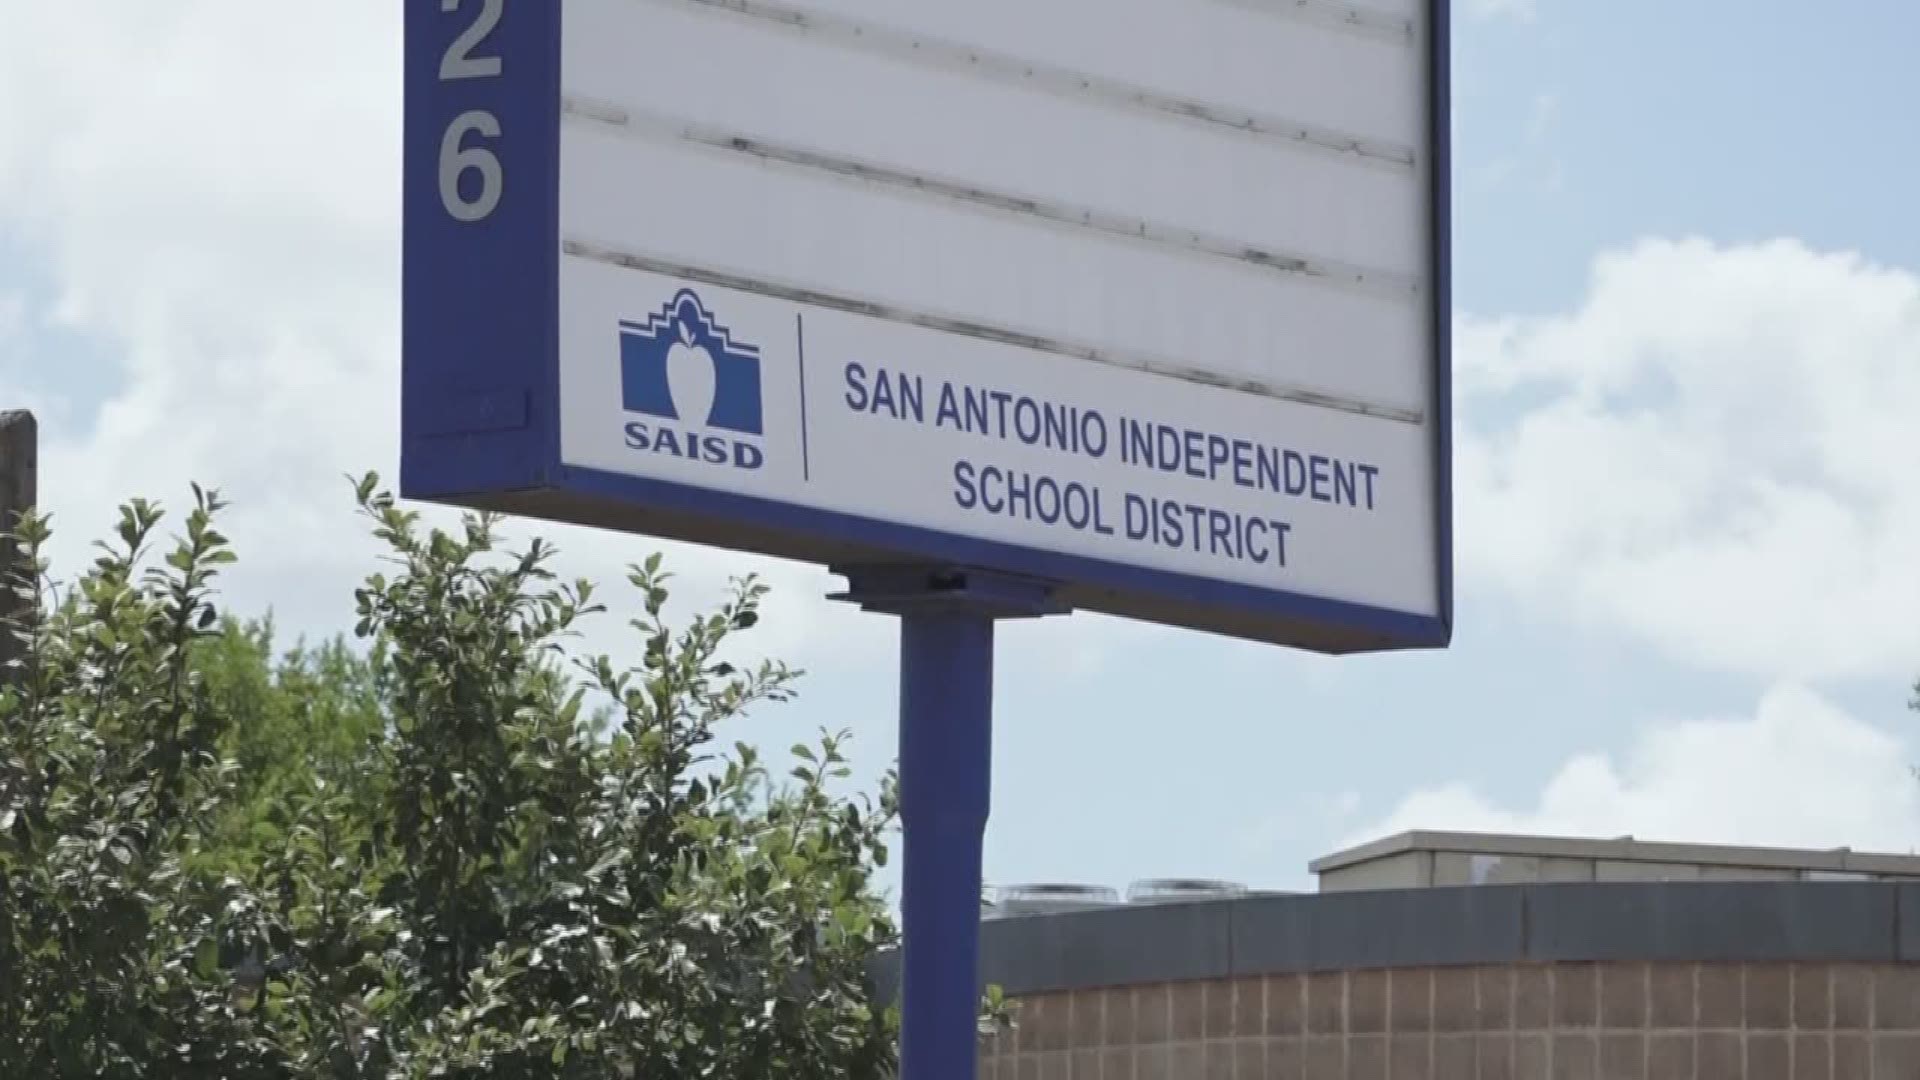 Week 2 of the school year for San Antonio ISD is underway, and the district is still battling air conditioning issues at schools while temperatures flirt with triple-digit temperatures.